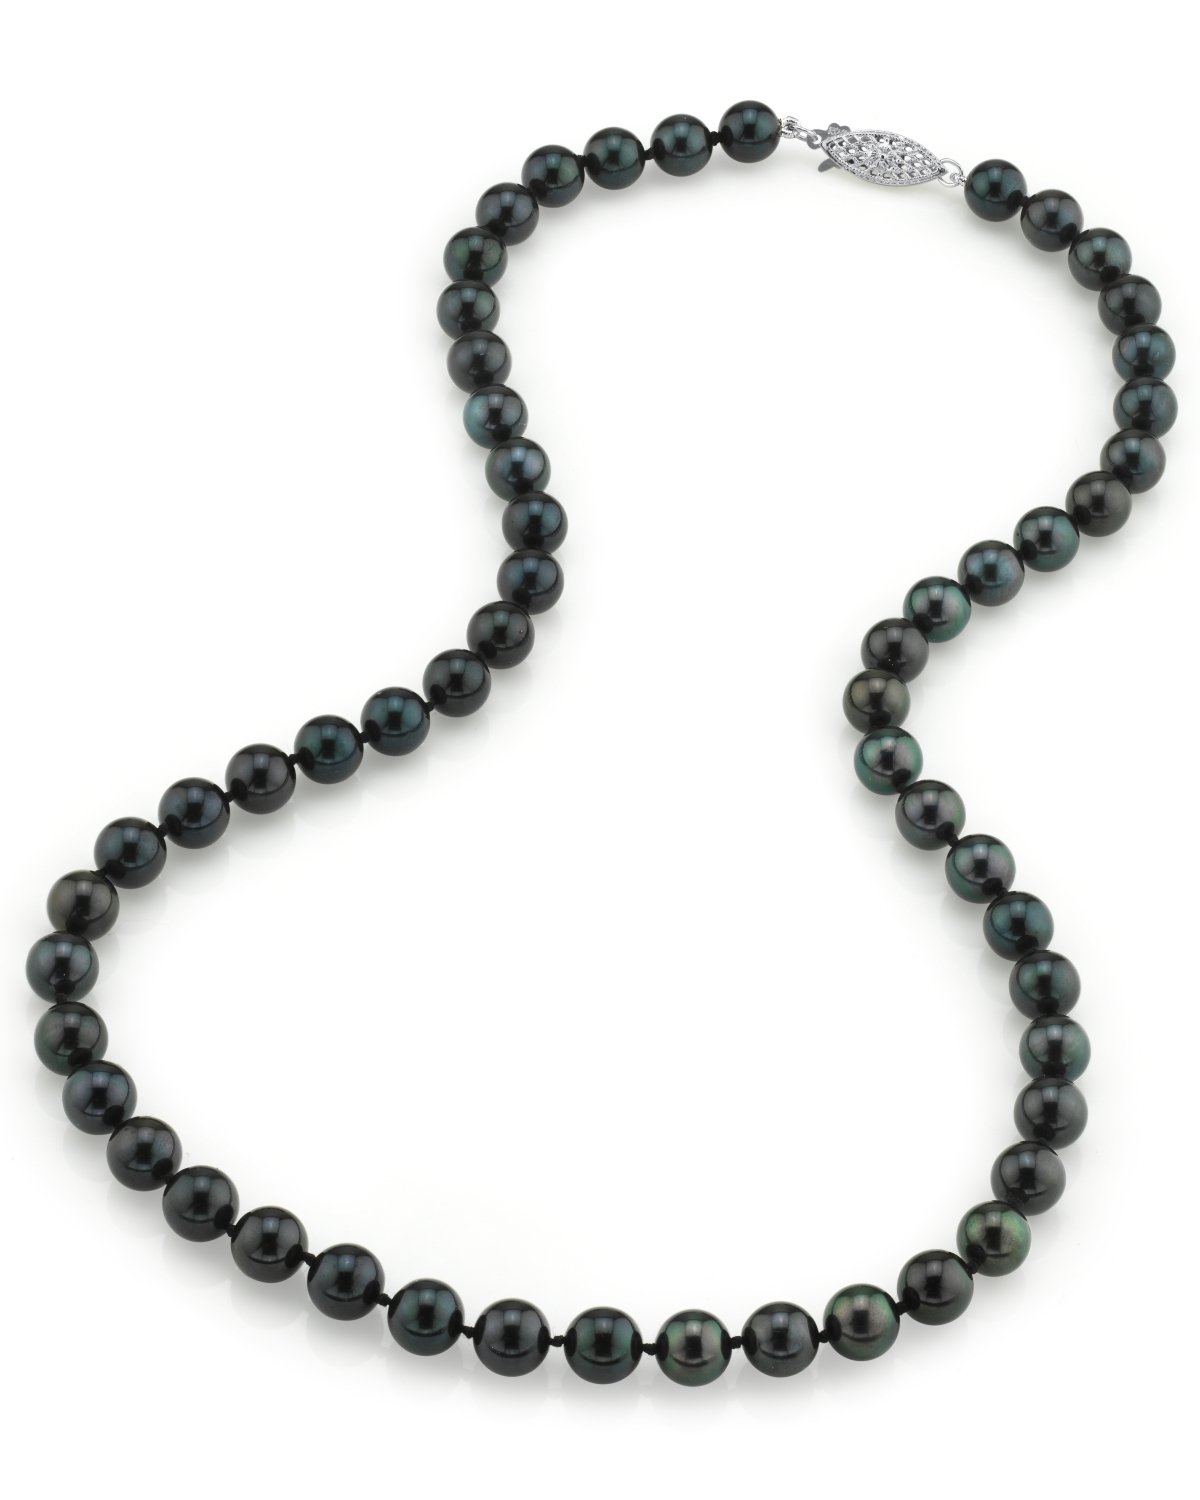 7.0-7.5mm Japanese Akoya Black Pearl Necklace- AAA Quality